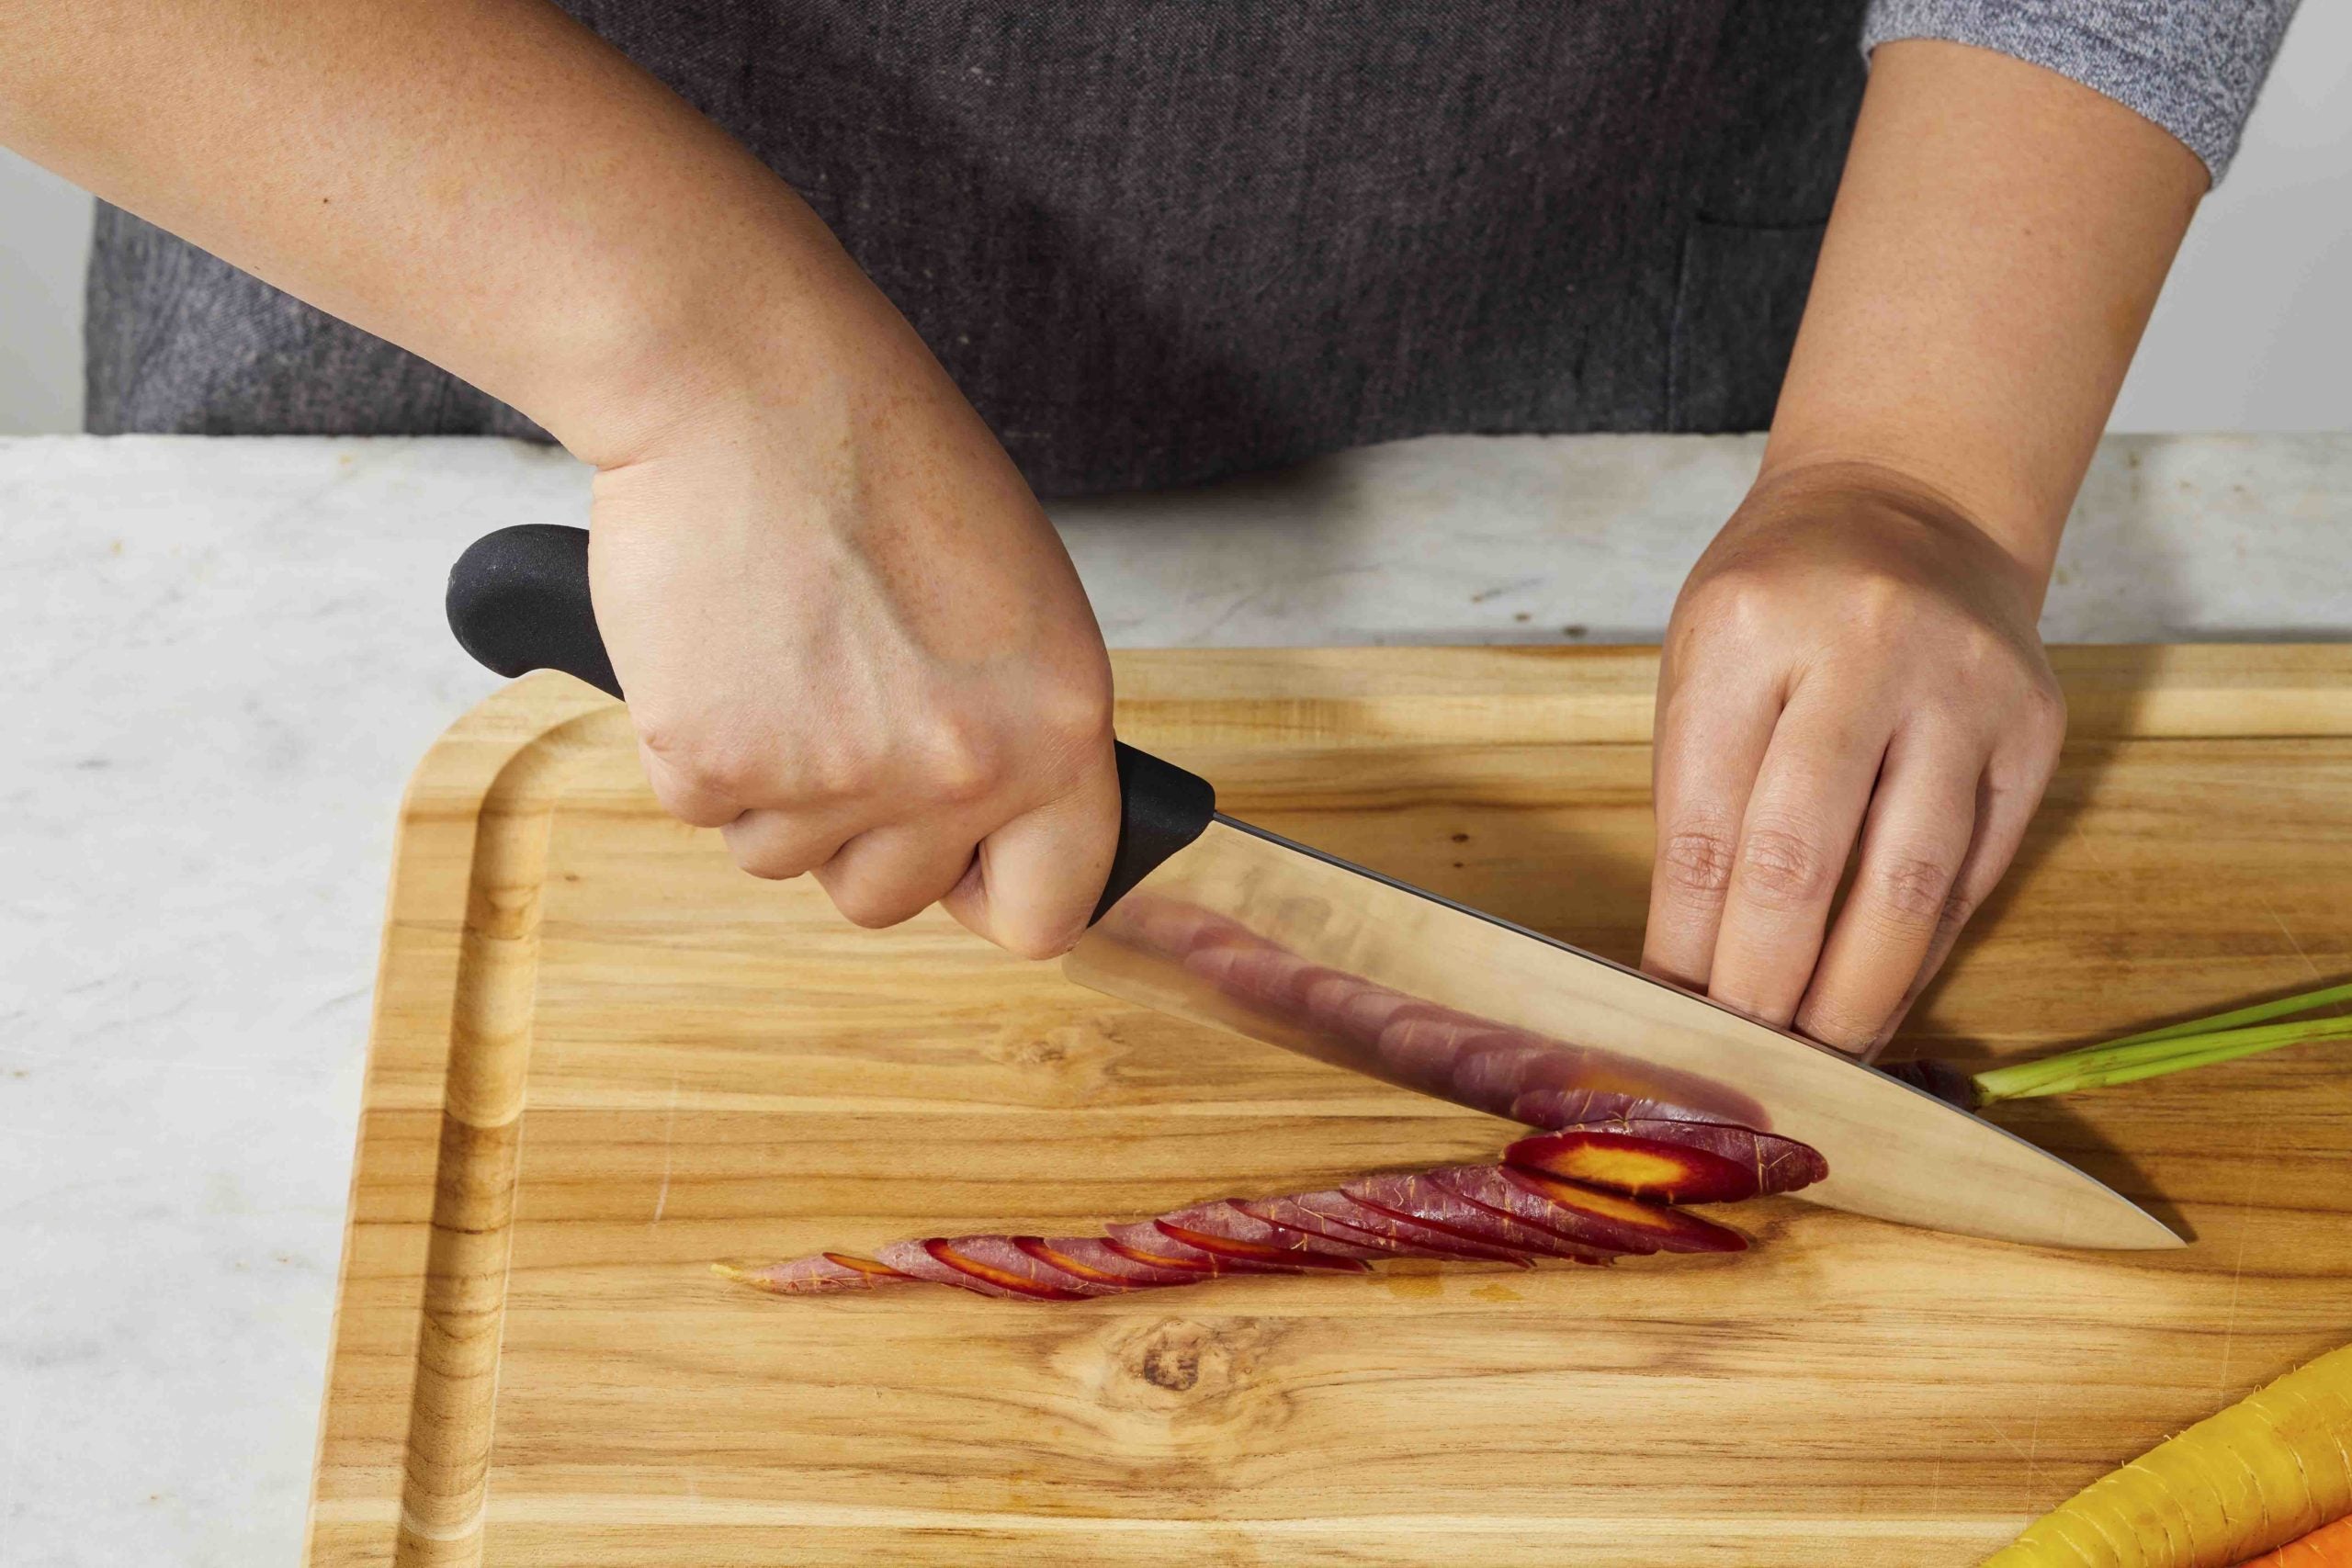 What You Should Do With Your Cutting Board Before Using A Knife